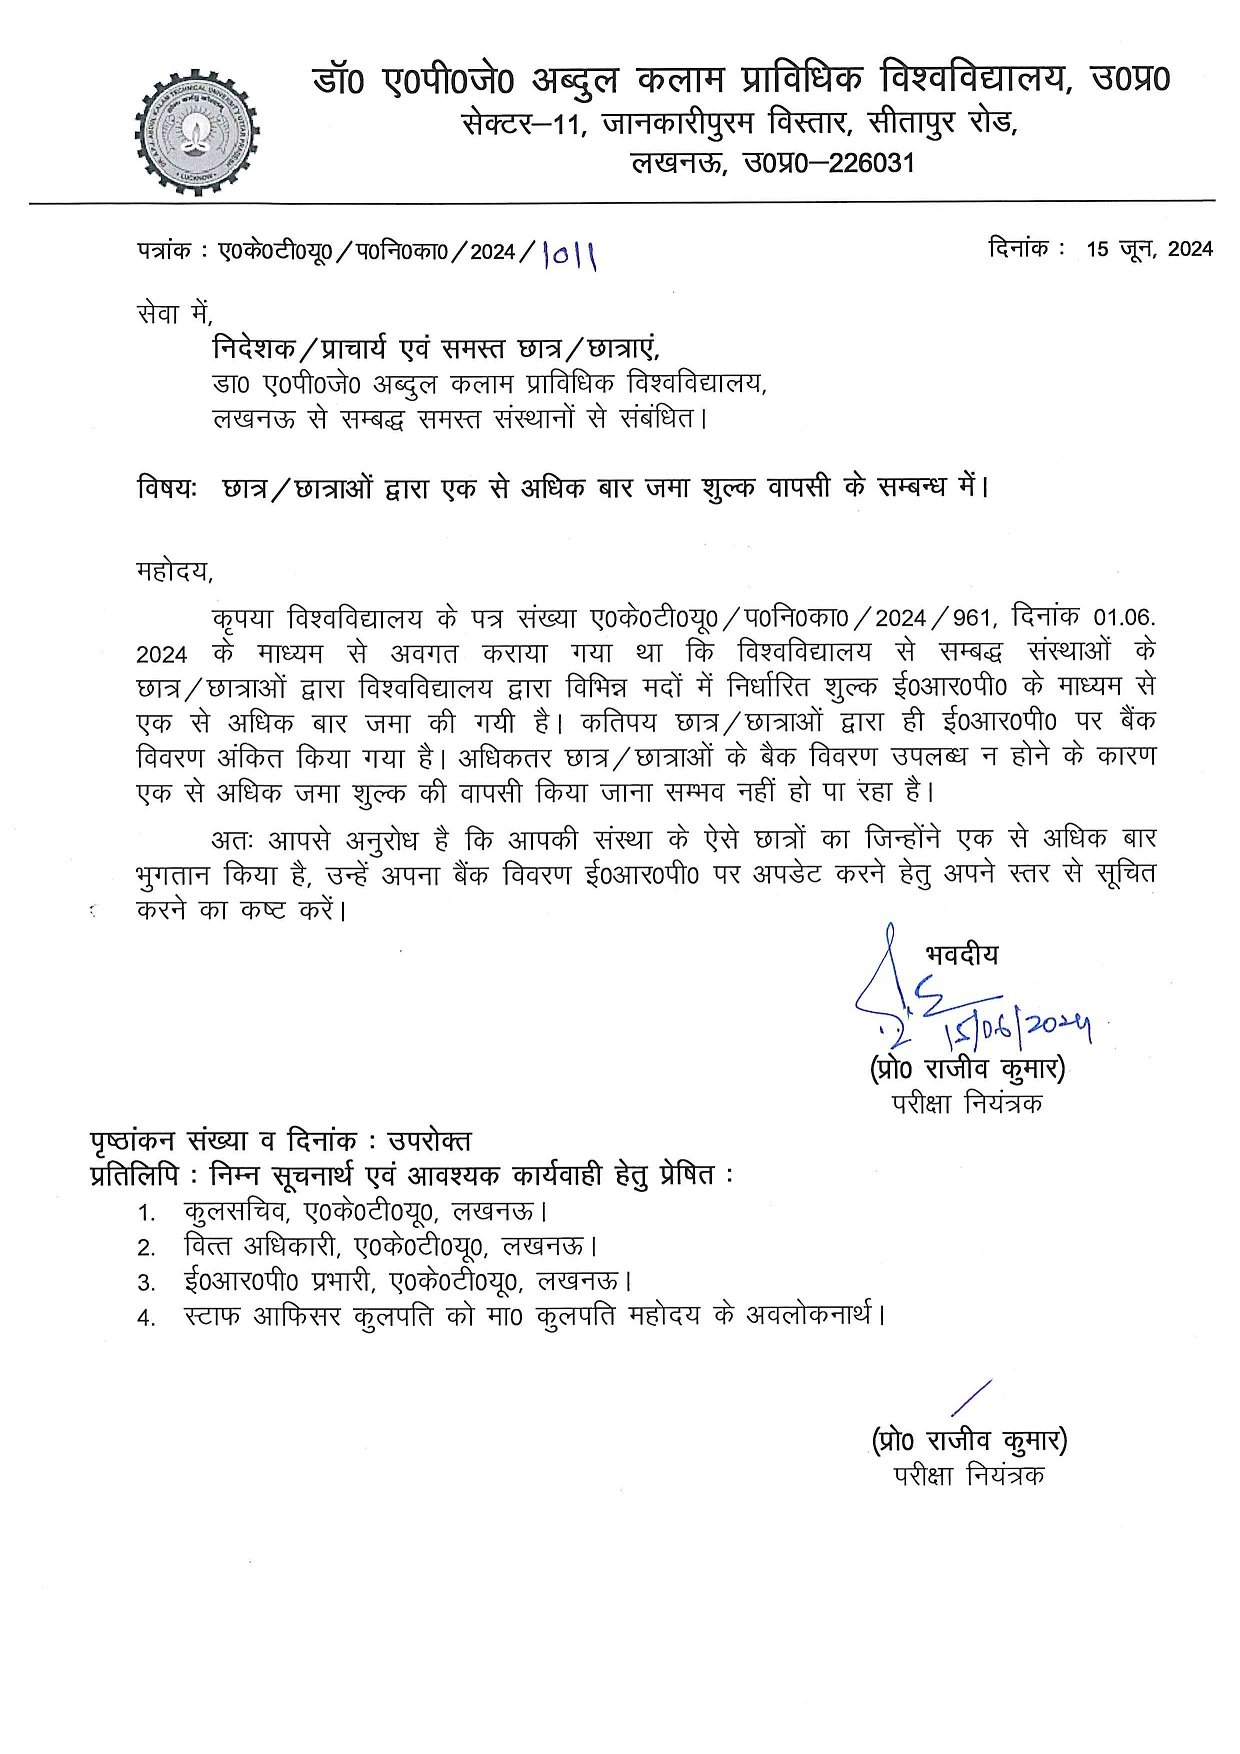 Circular Regarding Multiple Payment Done By Students to AKTU